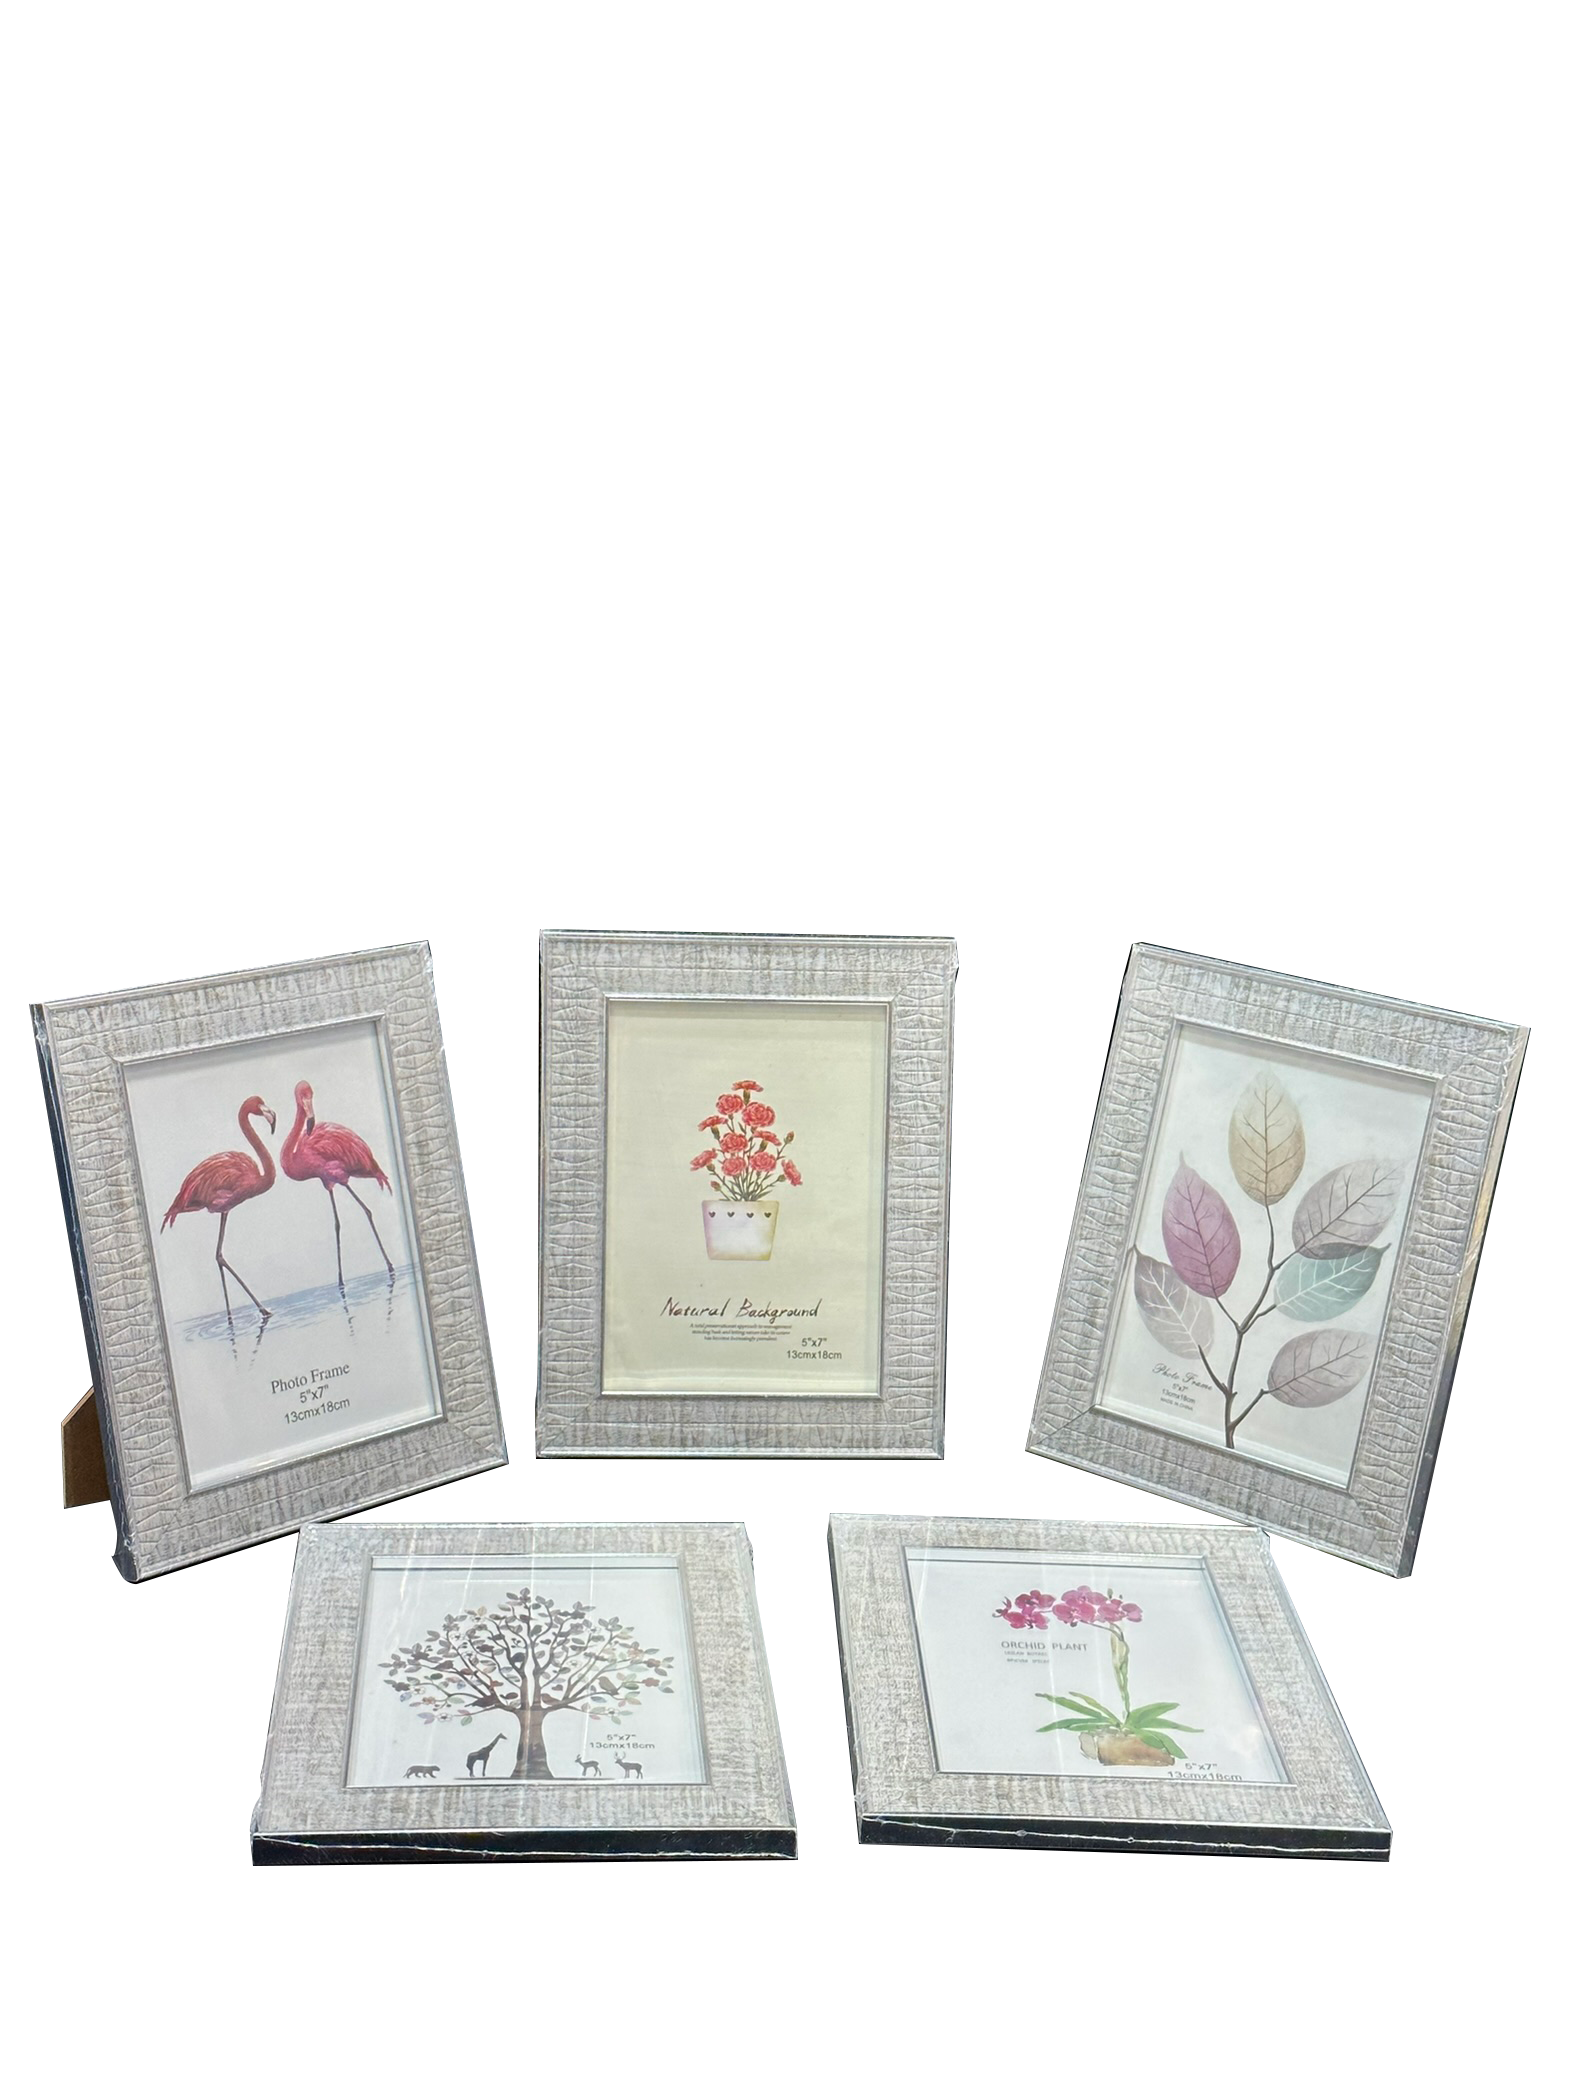 Silver rectangular picture frames - Sunset Gifts Store